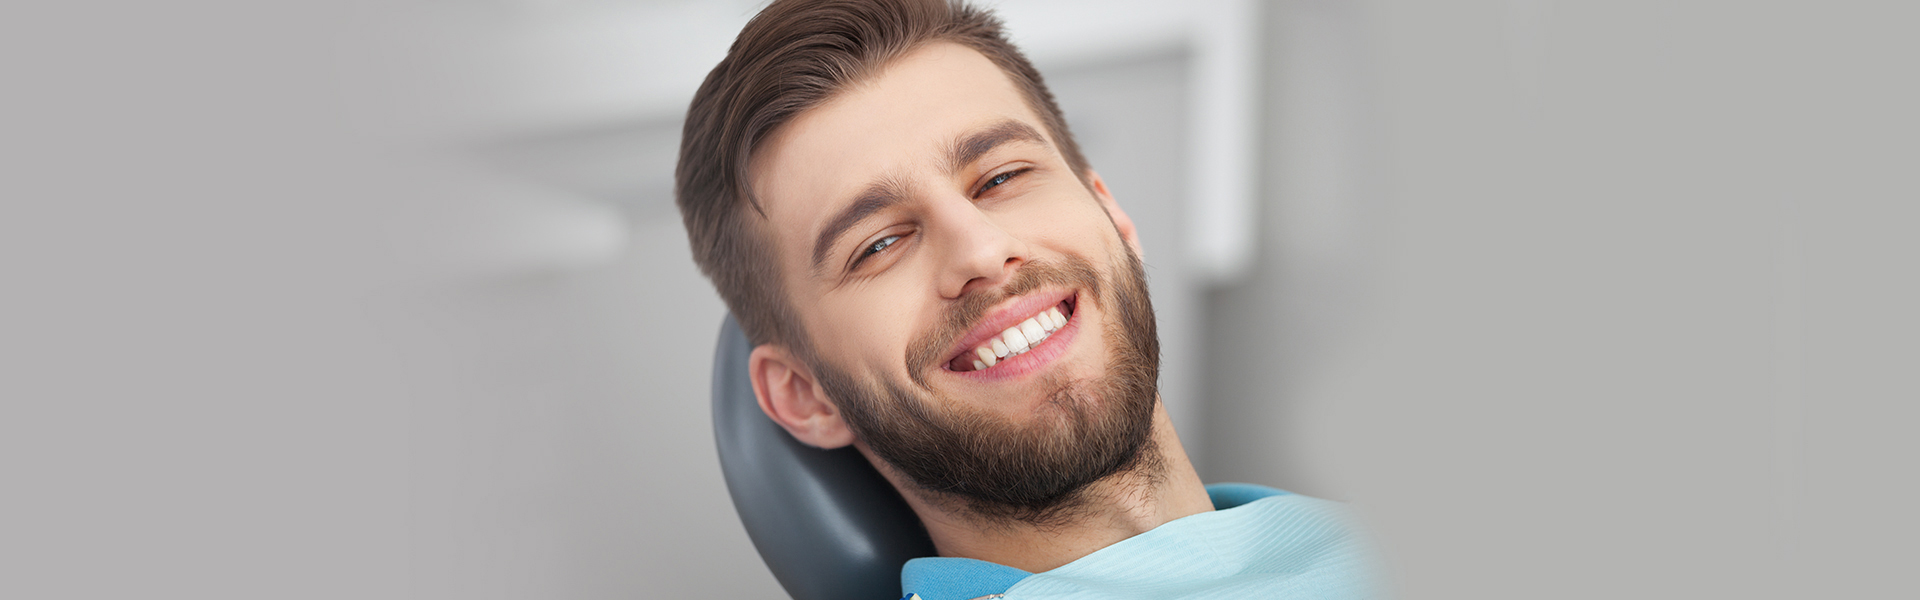 A Step-by-Step Guide on Tooth Care, Dental Exams, and Cleanings